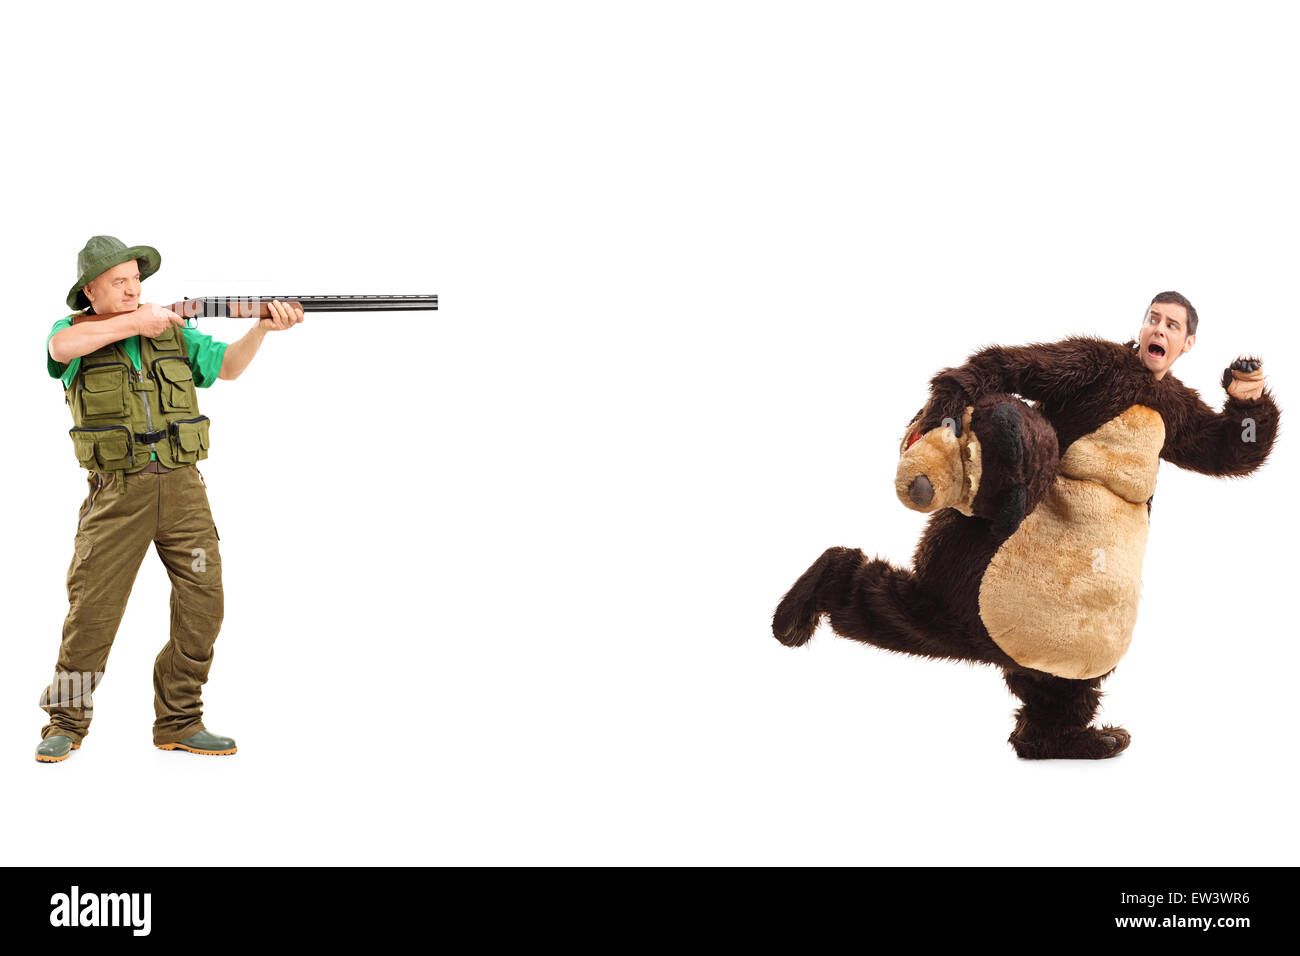 Full length portrait of a mature hunter aiming a rifle towards a man in a bear costume Stock Photo